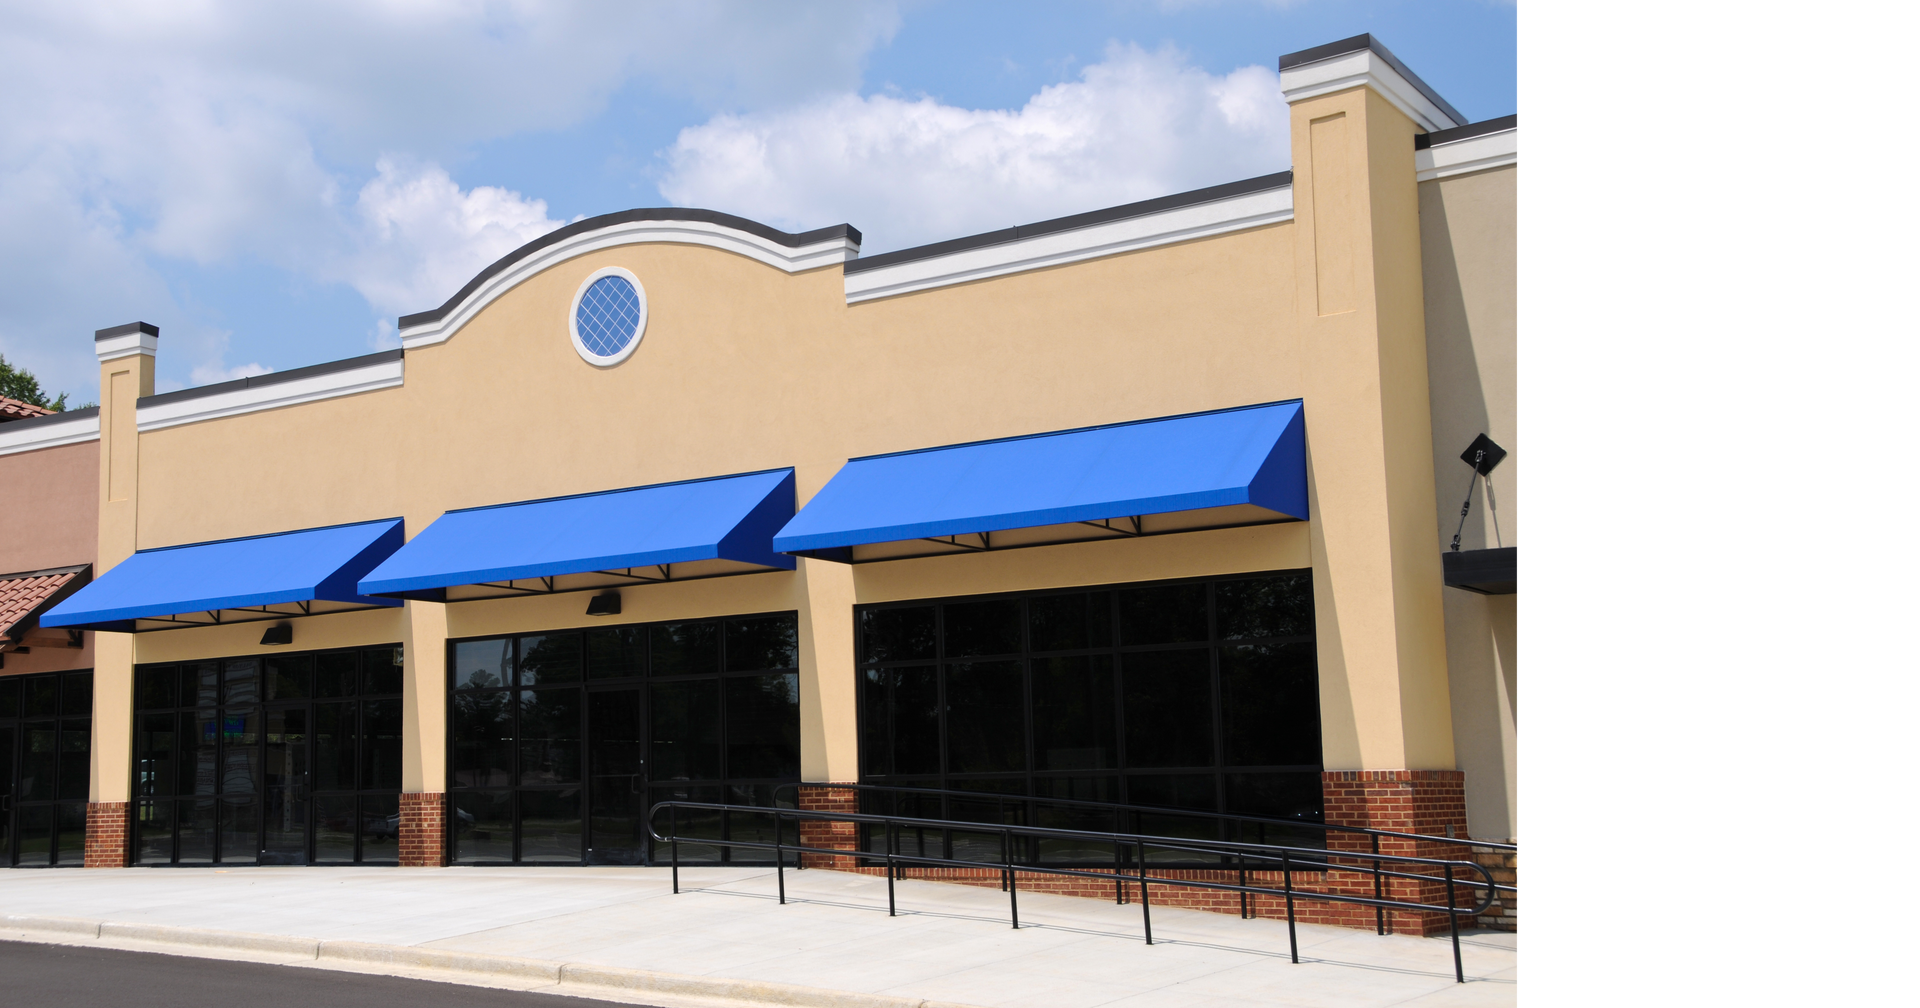 Commercial Glass Storefronts in Olive Branch, MS